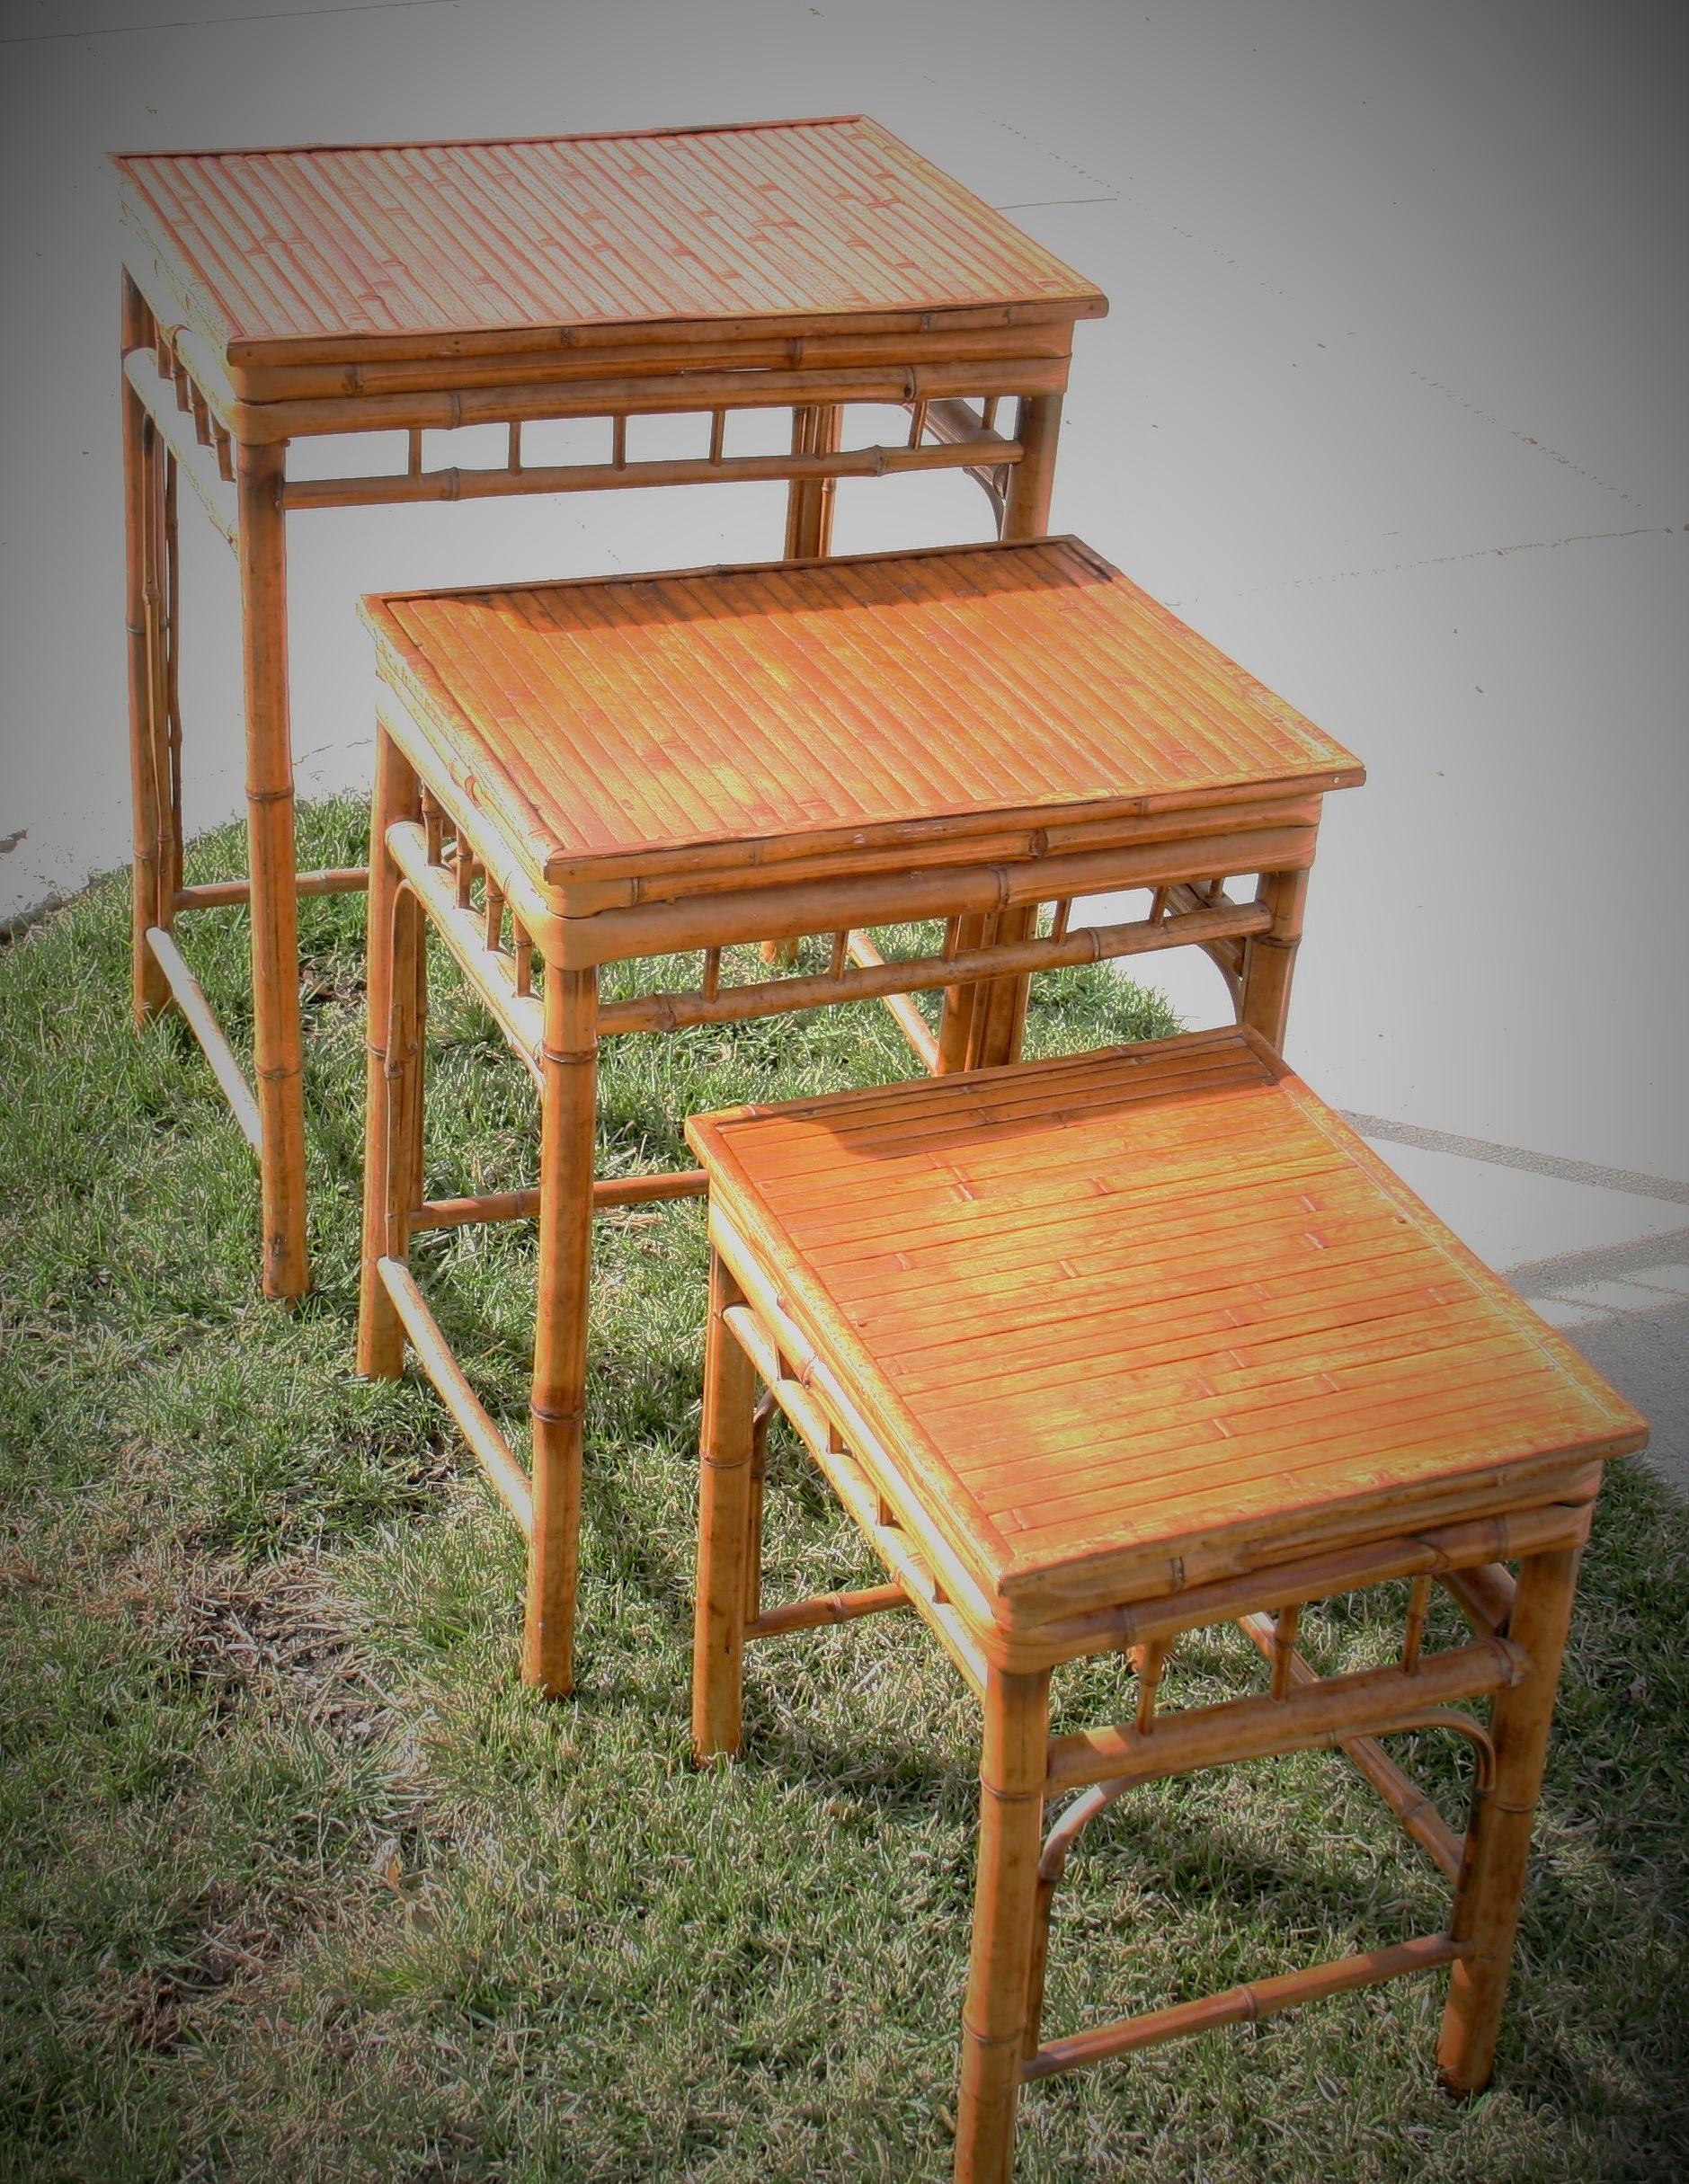 3-465 Set of English Colonial burnt bamboo tables
Measures: 16.5 x 22.5 x 27